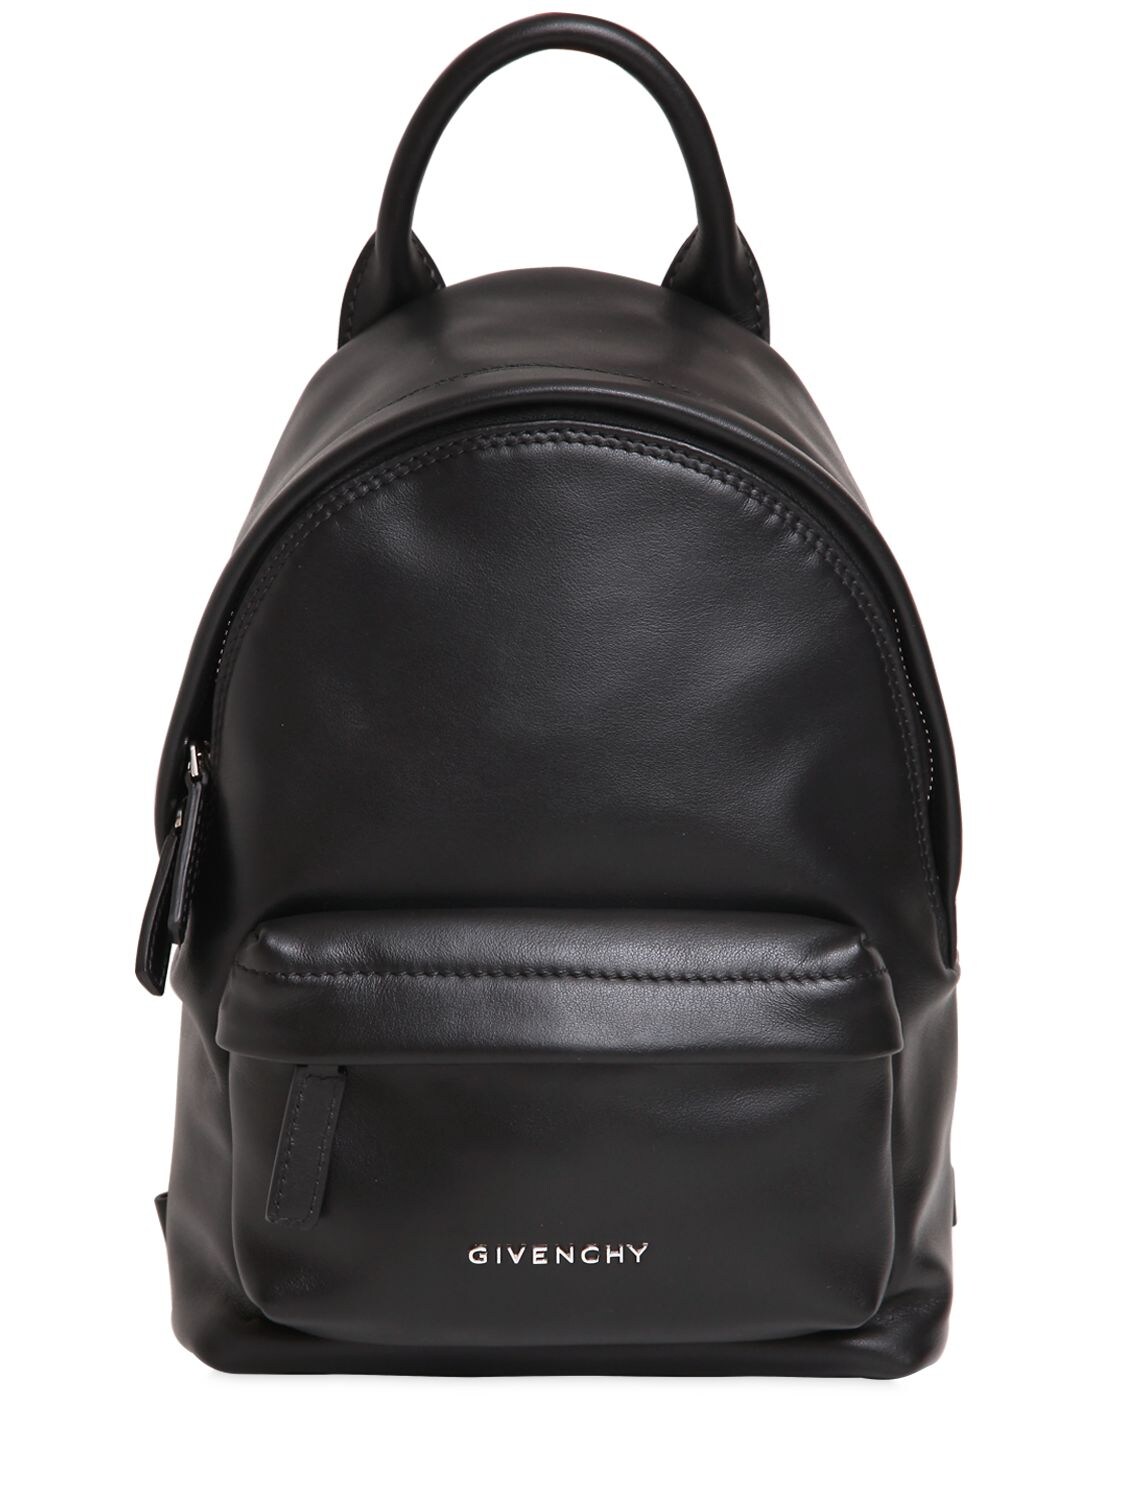 NANO SMOOTH LEATHER BACKPACK